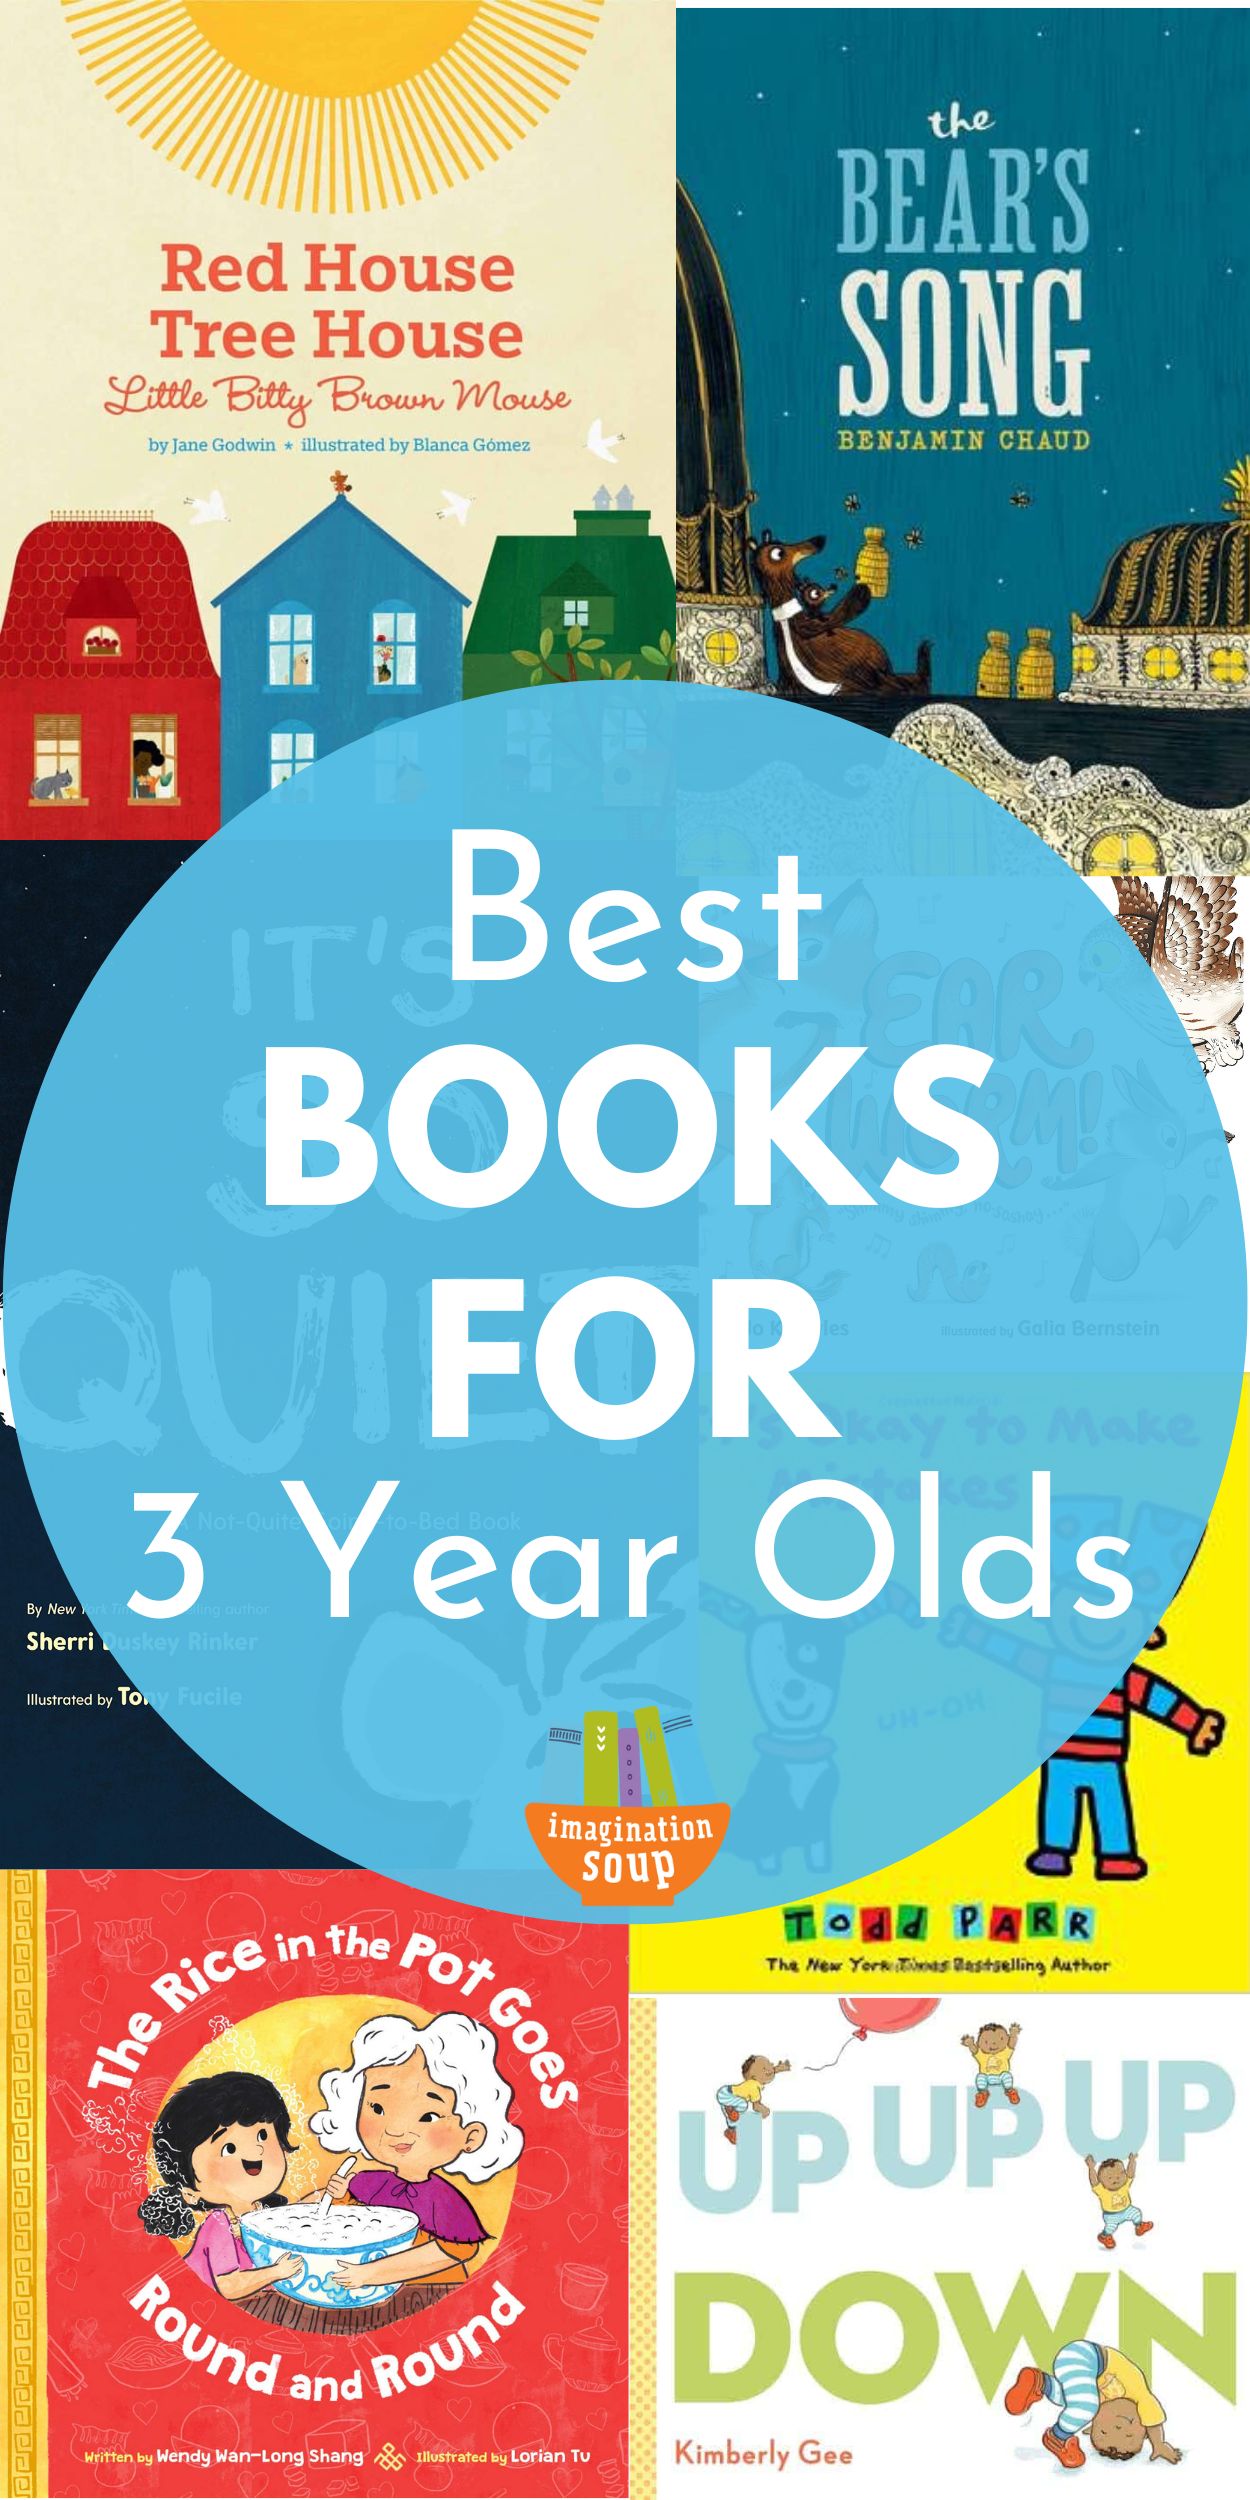 Are you looking for the must-read best books for 3 year olds to read aloud? These are my top picks for three-year-olds that toddlers and preschoolers love!